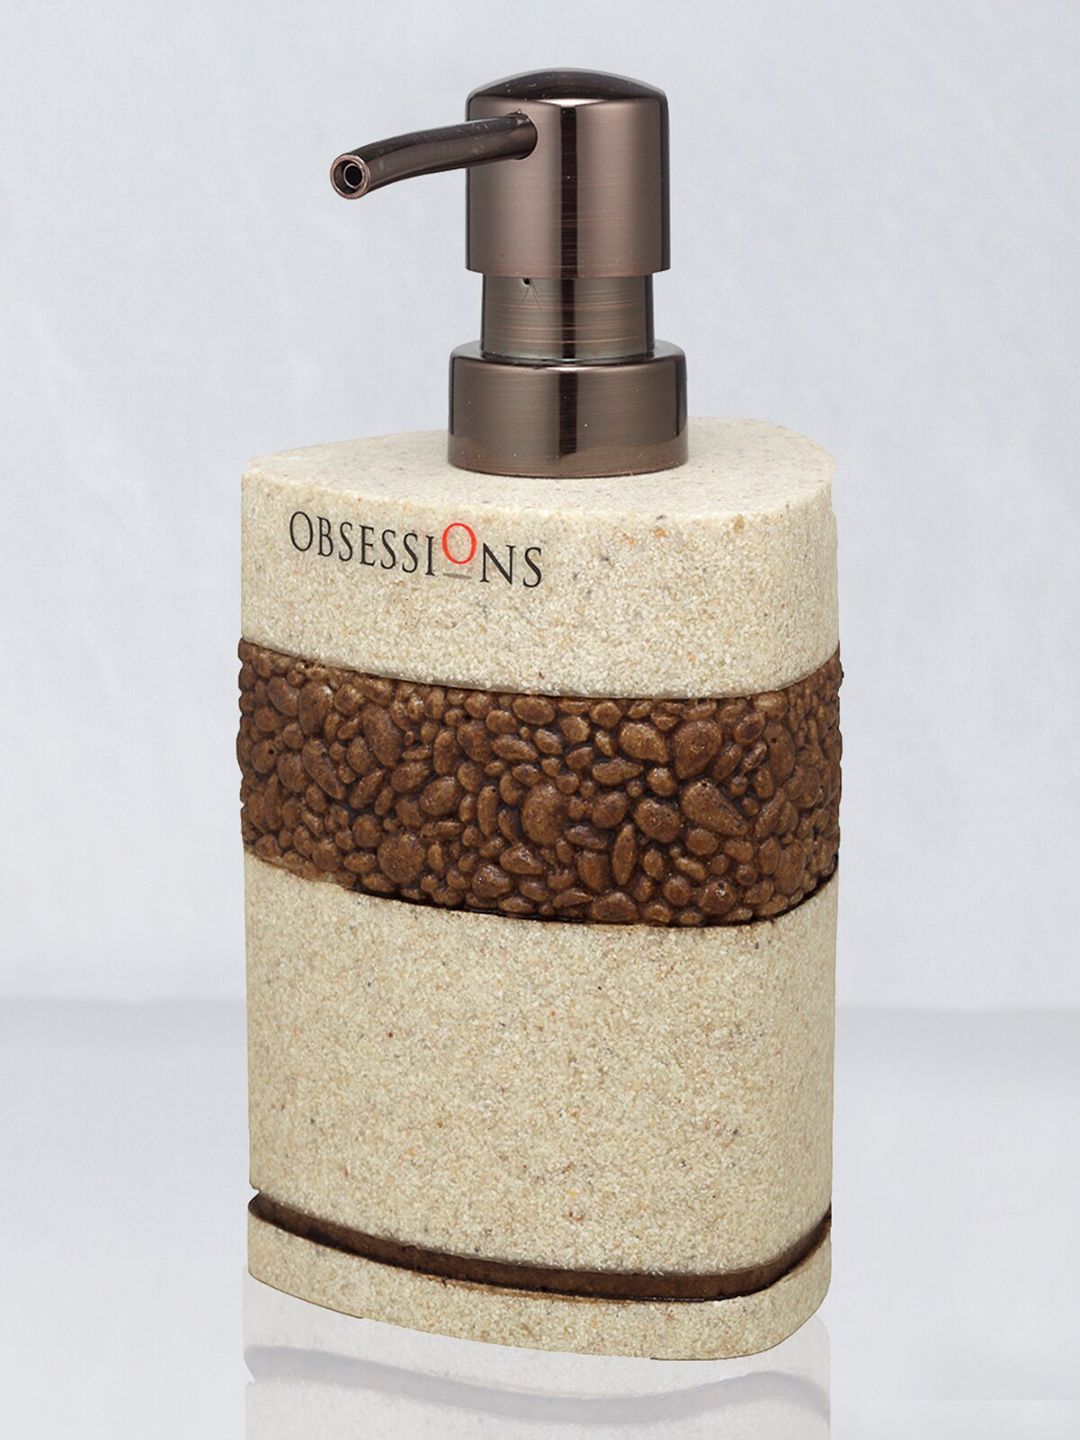 OBSESSIONS Unisex Brown Soap & Lotion Dispenser Bathroom Accessories Price in India